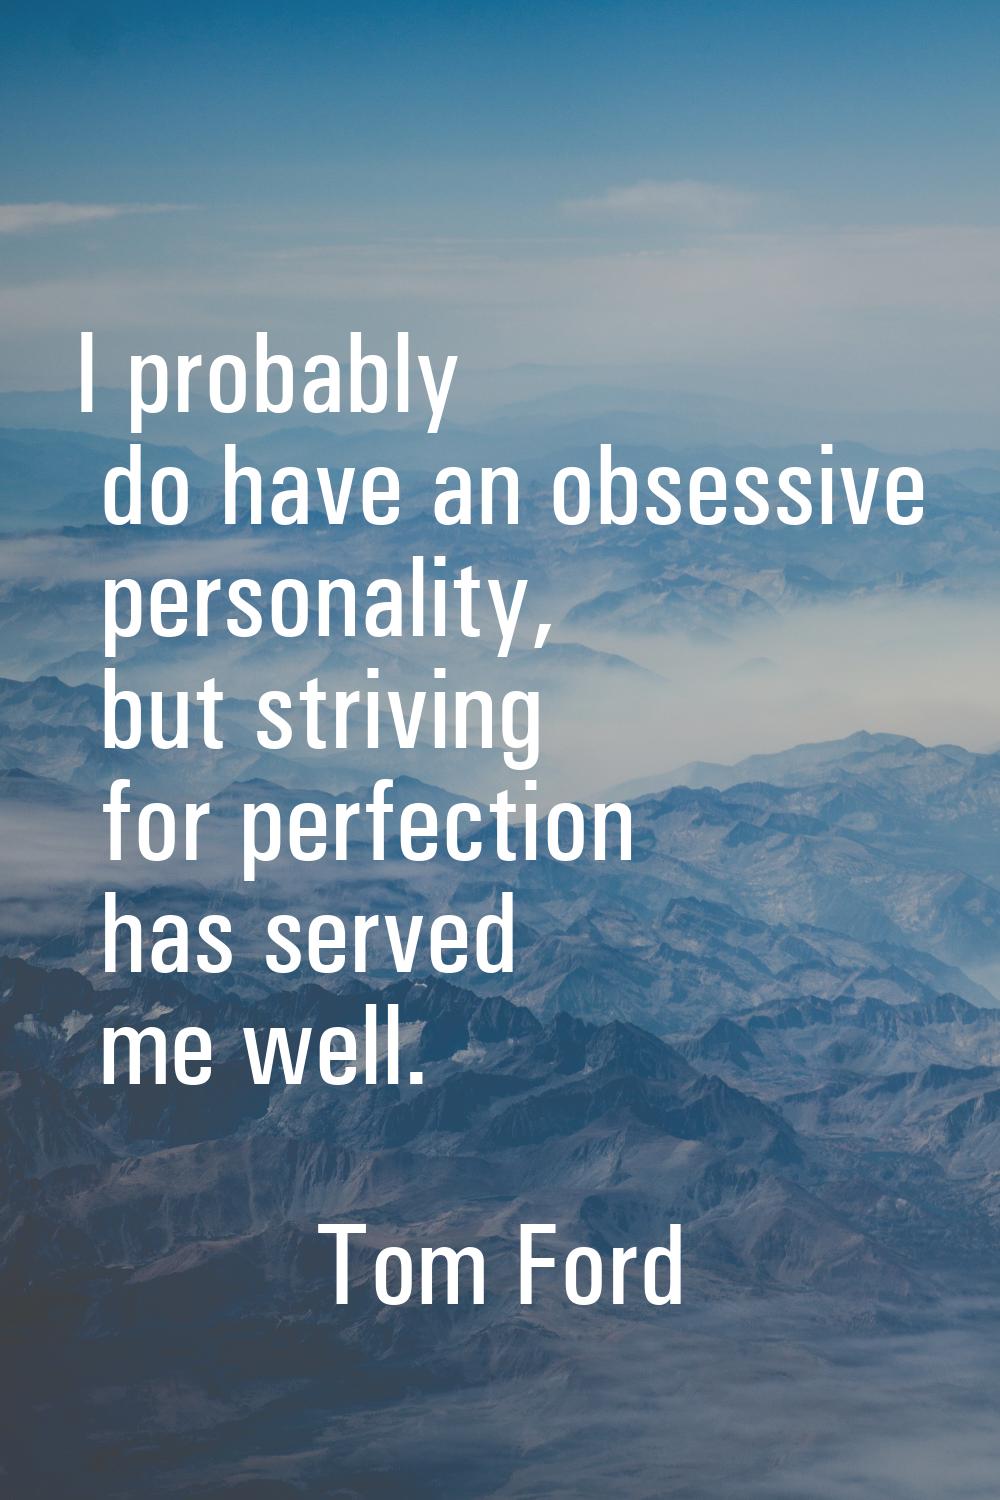 I probably do have an obsessive personality, but striving for perfection has served me well.